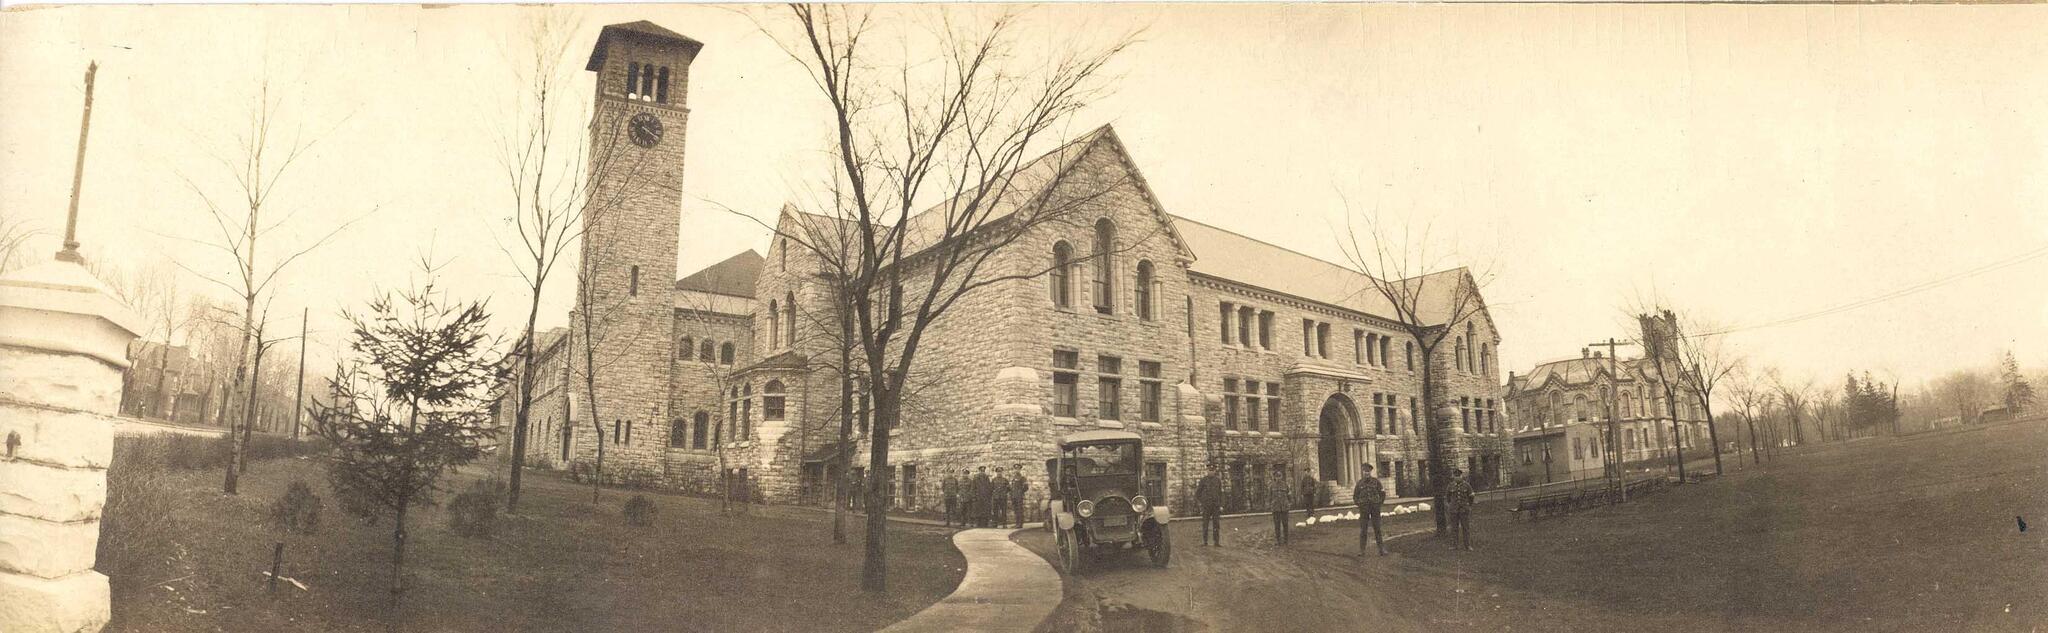 Grant Hall in the 1910s